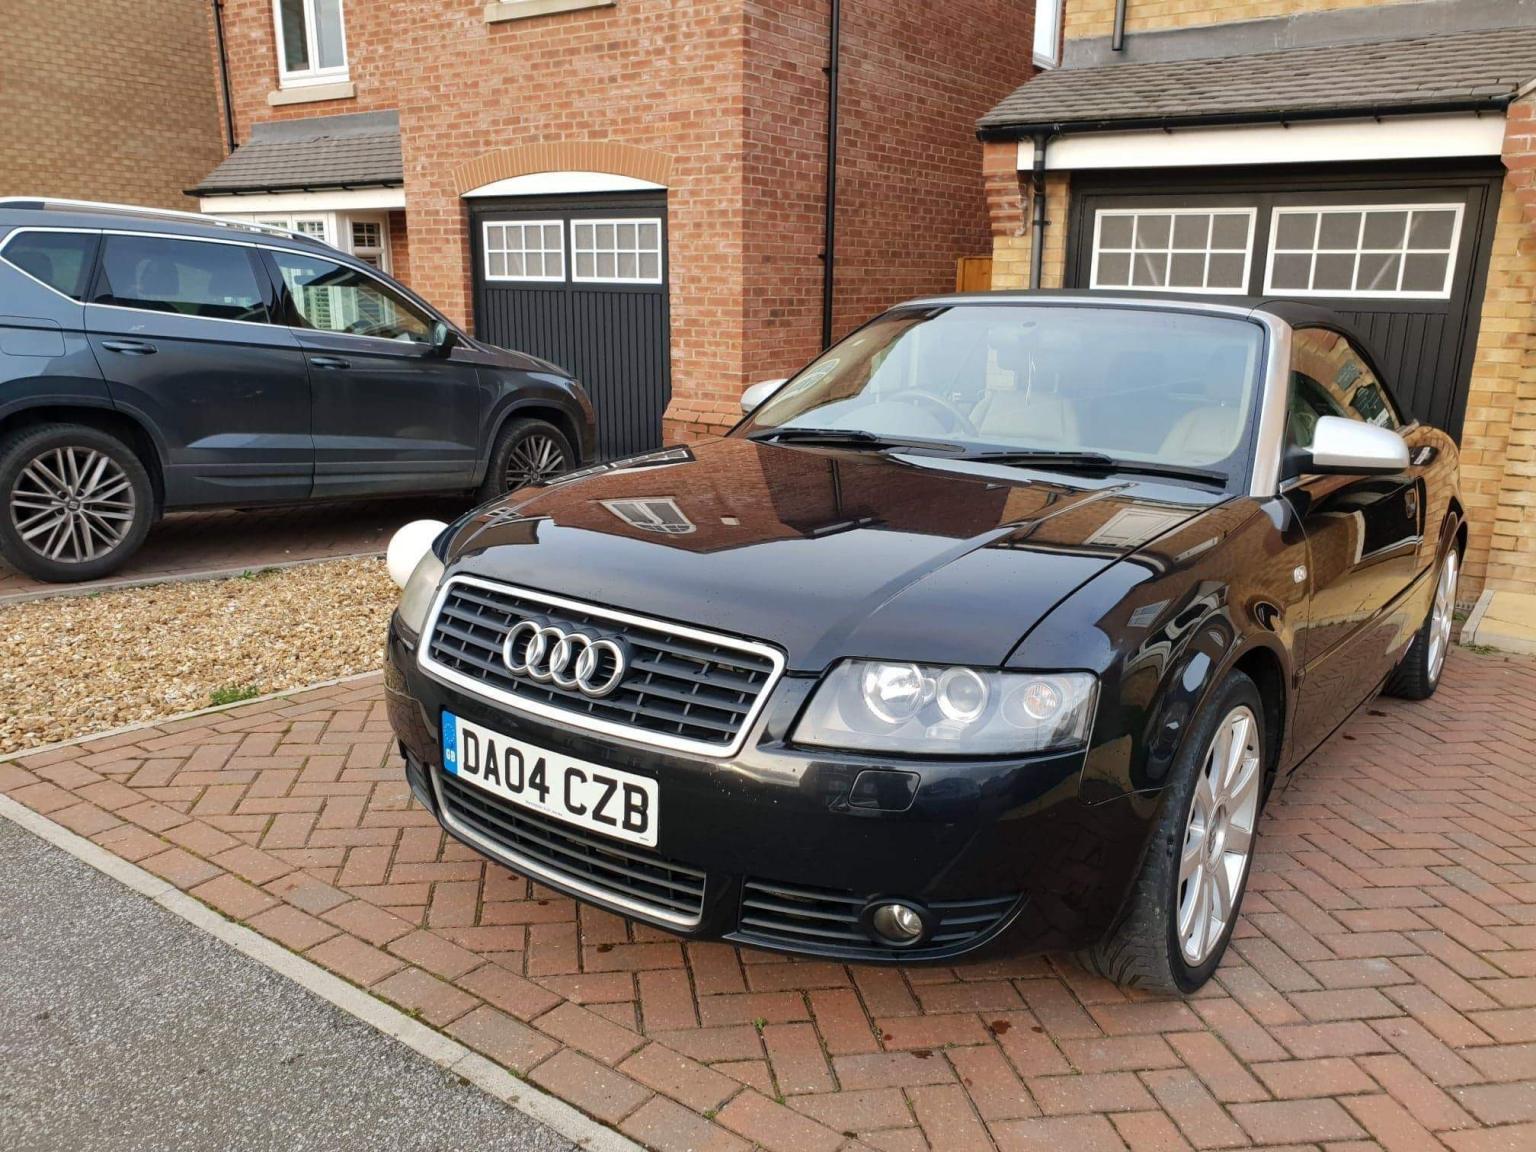 Audi A4 Convertible 3 0 In S20 Sheffield For 2 500 00 For